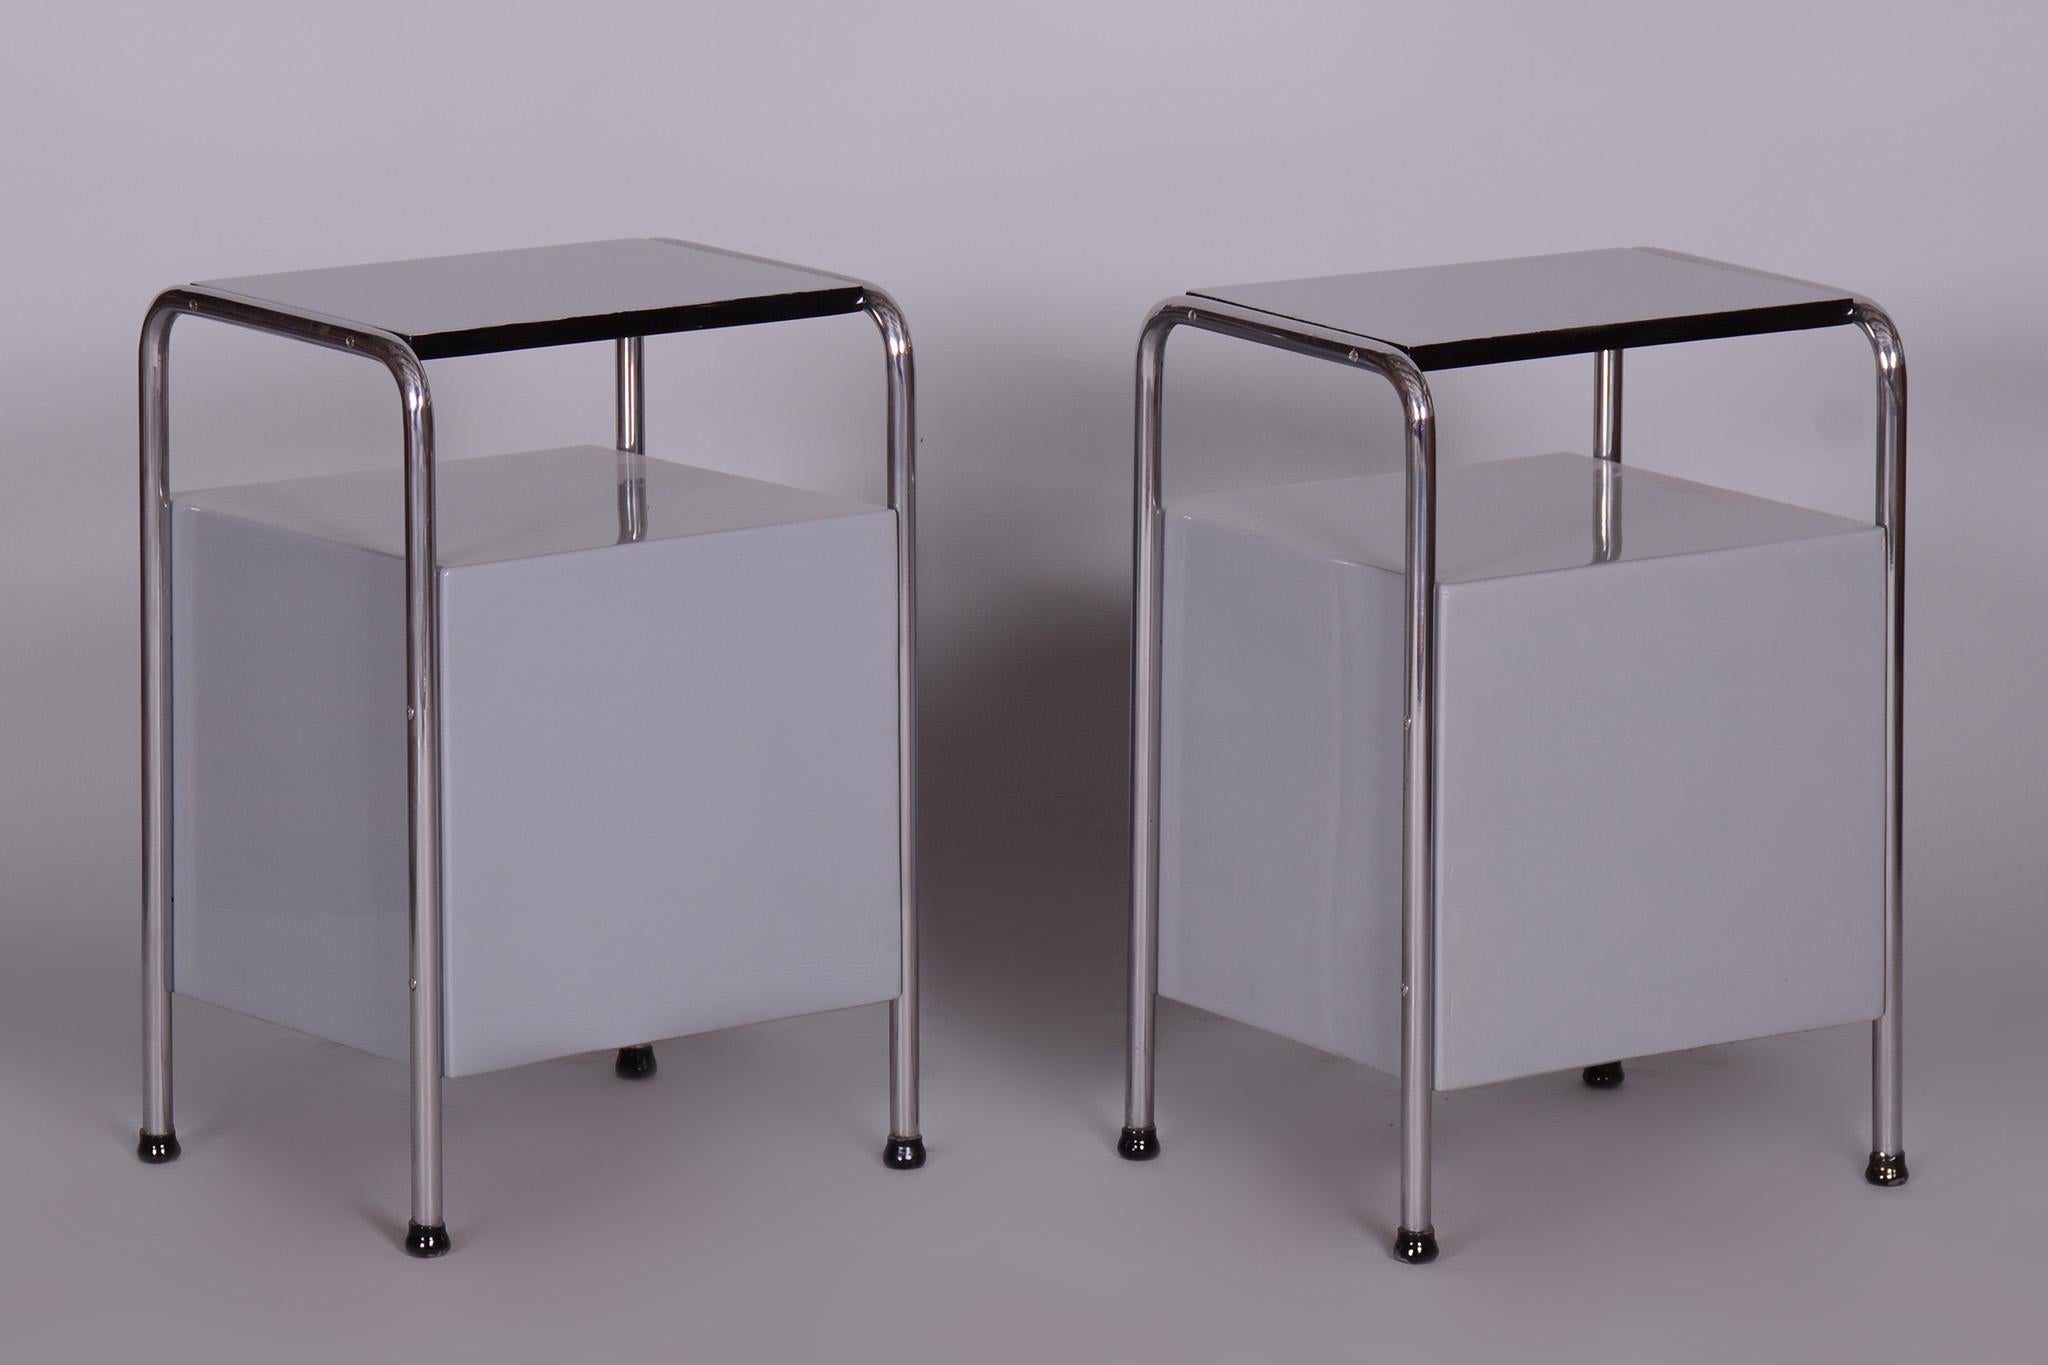 Restored pair of bed-side tables by Vichr a spol.

Maker: Vichr a spol.
Source: Czechia (Czechoslovakia)
Period: 1930-1939
Material: Chrome-Plated Steel, Lacquered Beech Wood to High Gloss

It has been fully restored by our professional